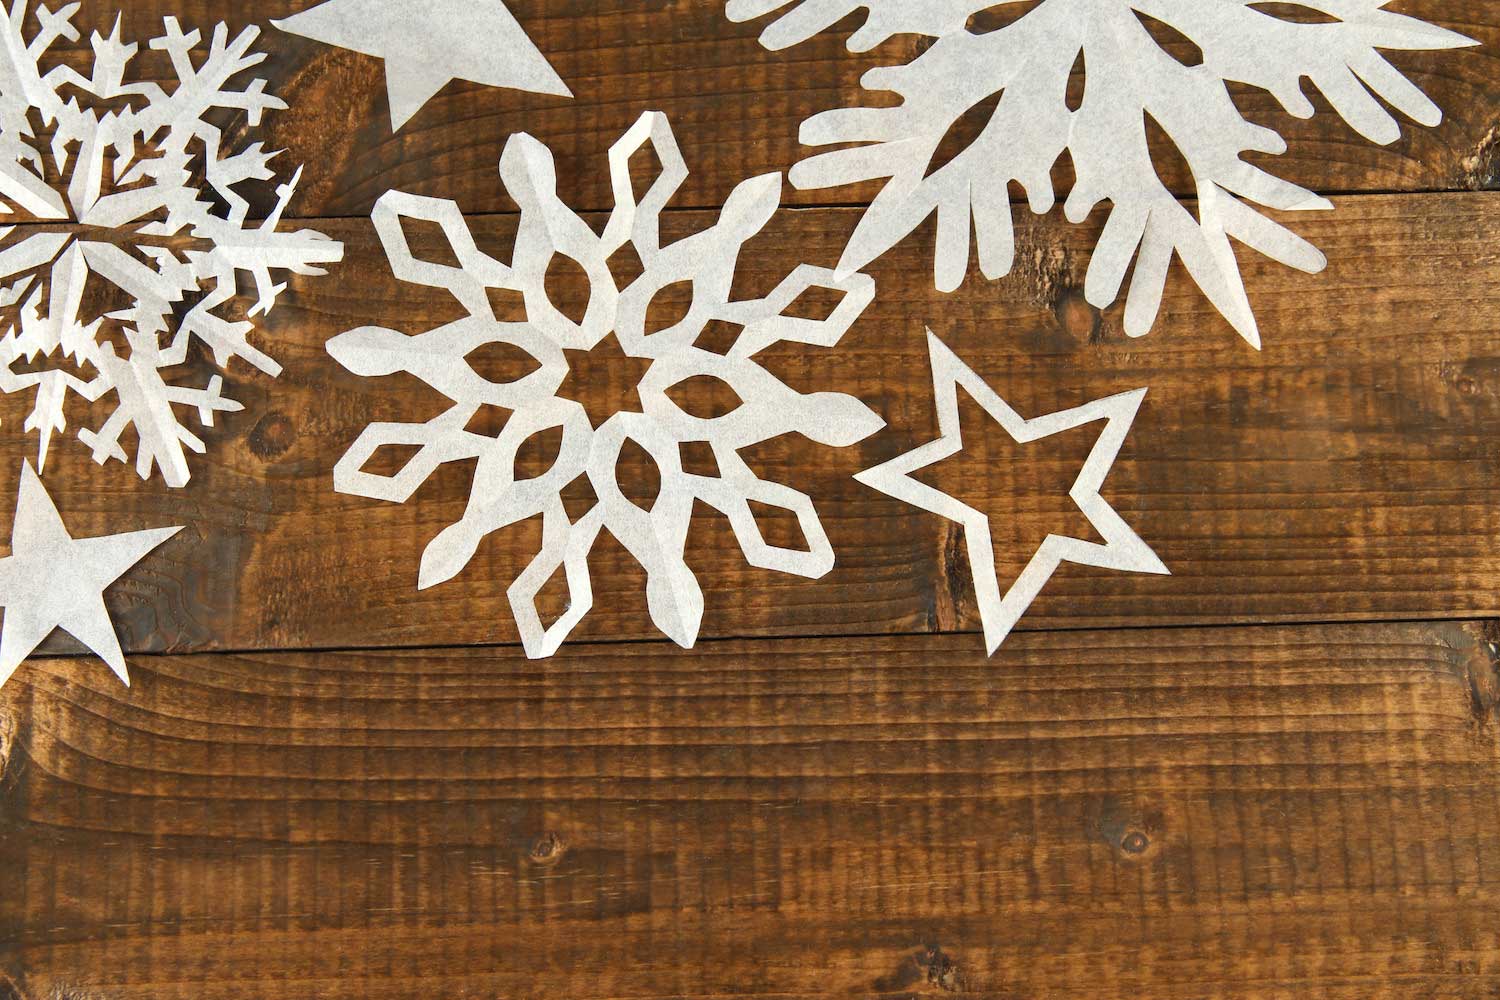 Paper snowflakes on a wooden table.